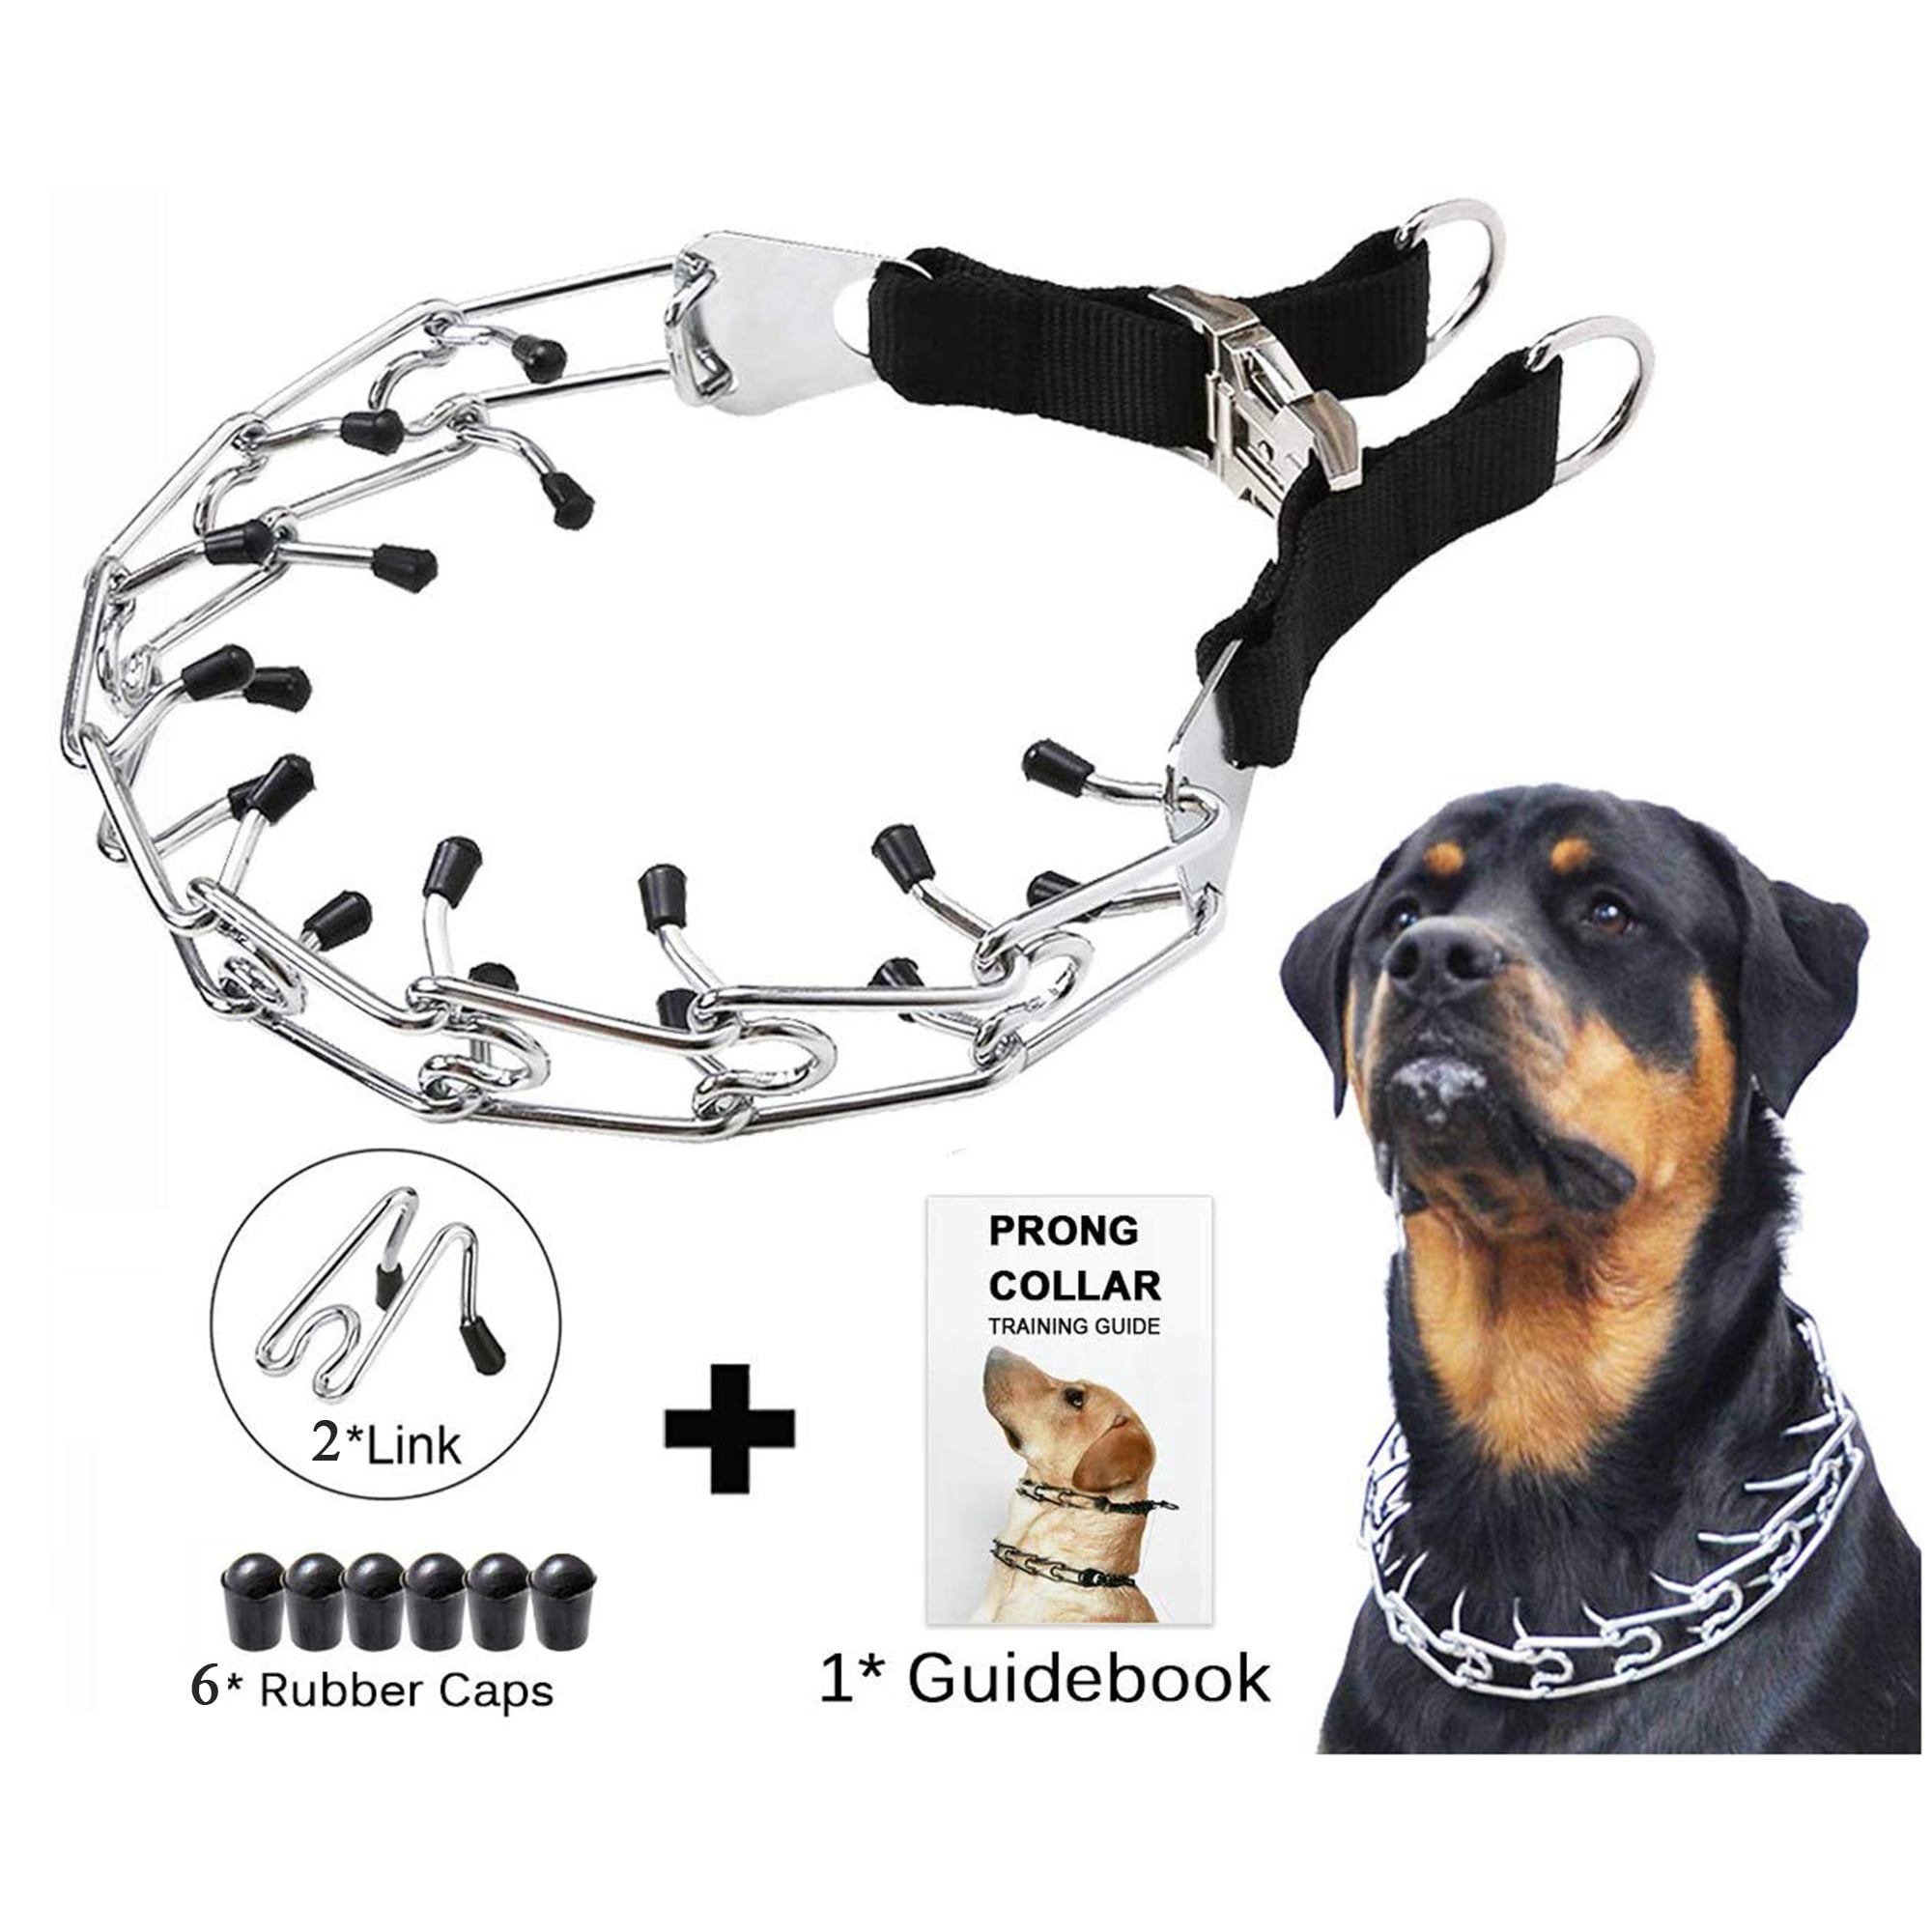 Dog training collar pet supply stainless steel prong pinch choke 16"-24" Strong 